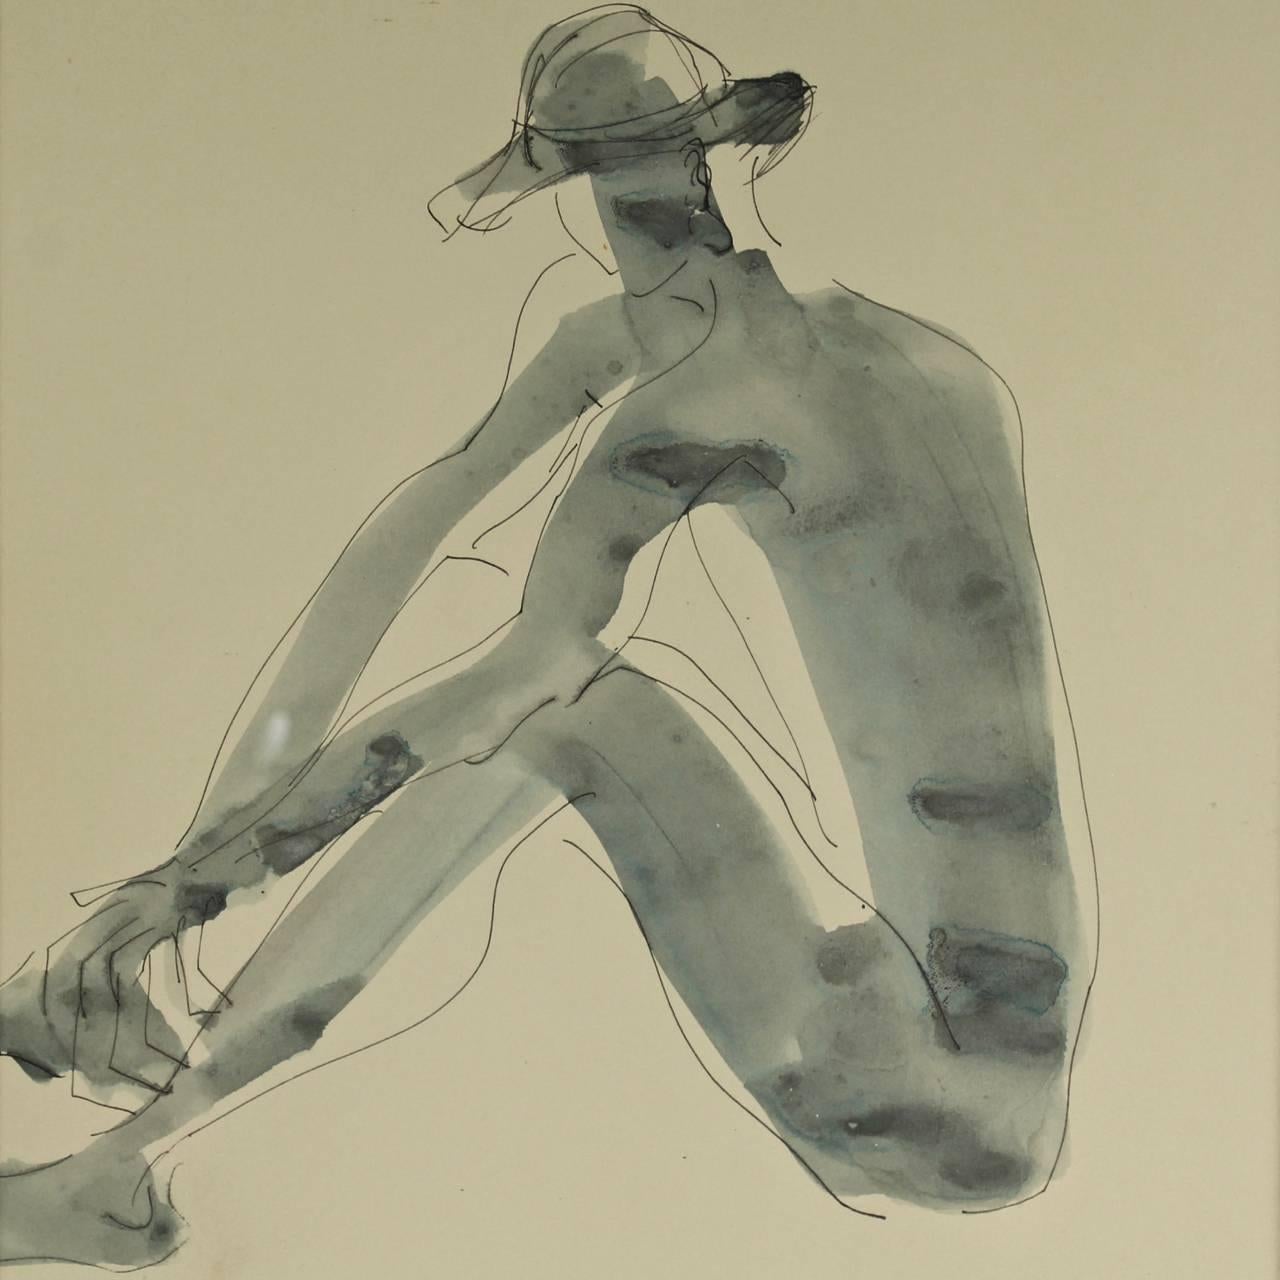 Seated Male Nude with Hat by Janet Lippincott.

Ink and watecolor on paper.

Signed and dated 1963 lower right.

Matted under glass in a contemporary frame.

Frame size: 
Height: circa 18 1/2 in. 
Width: circa 15 in.

Sight size: